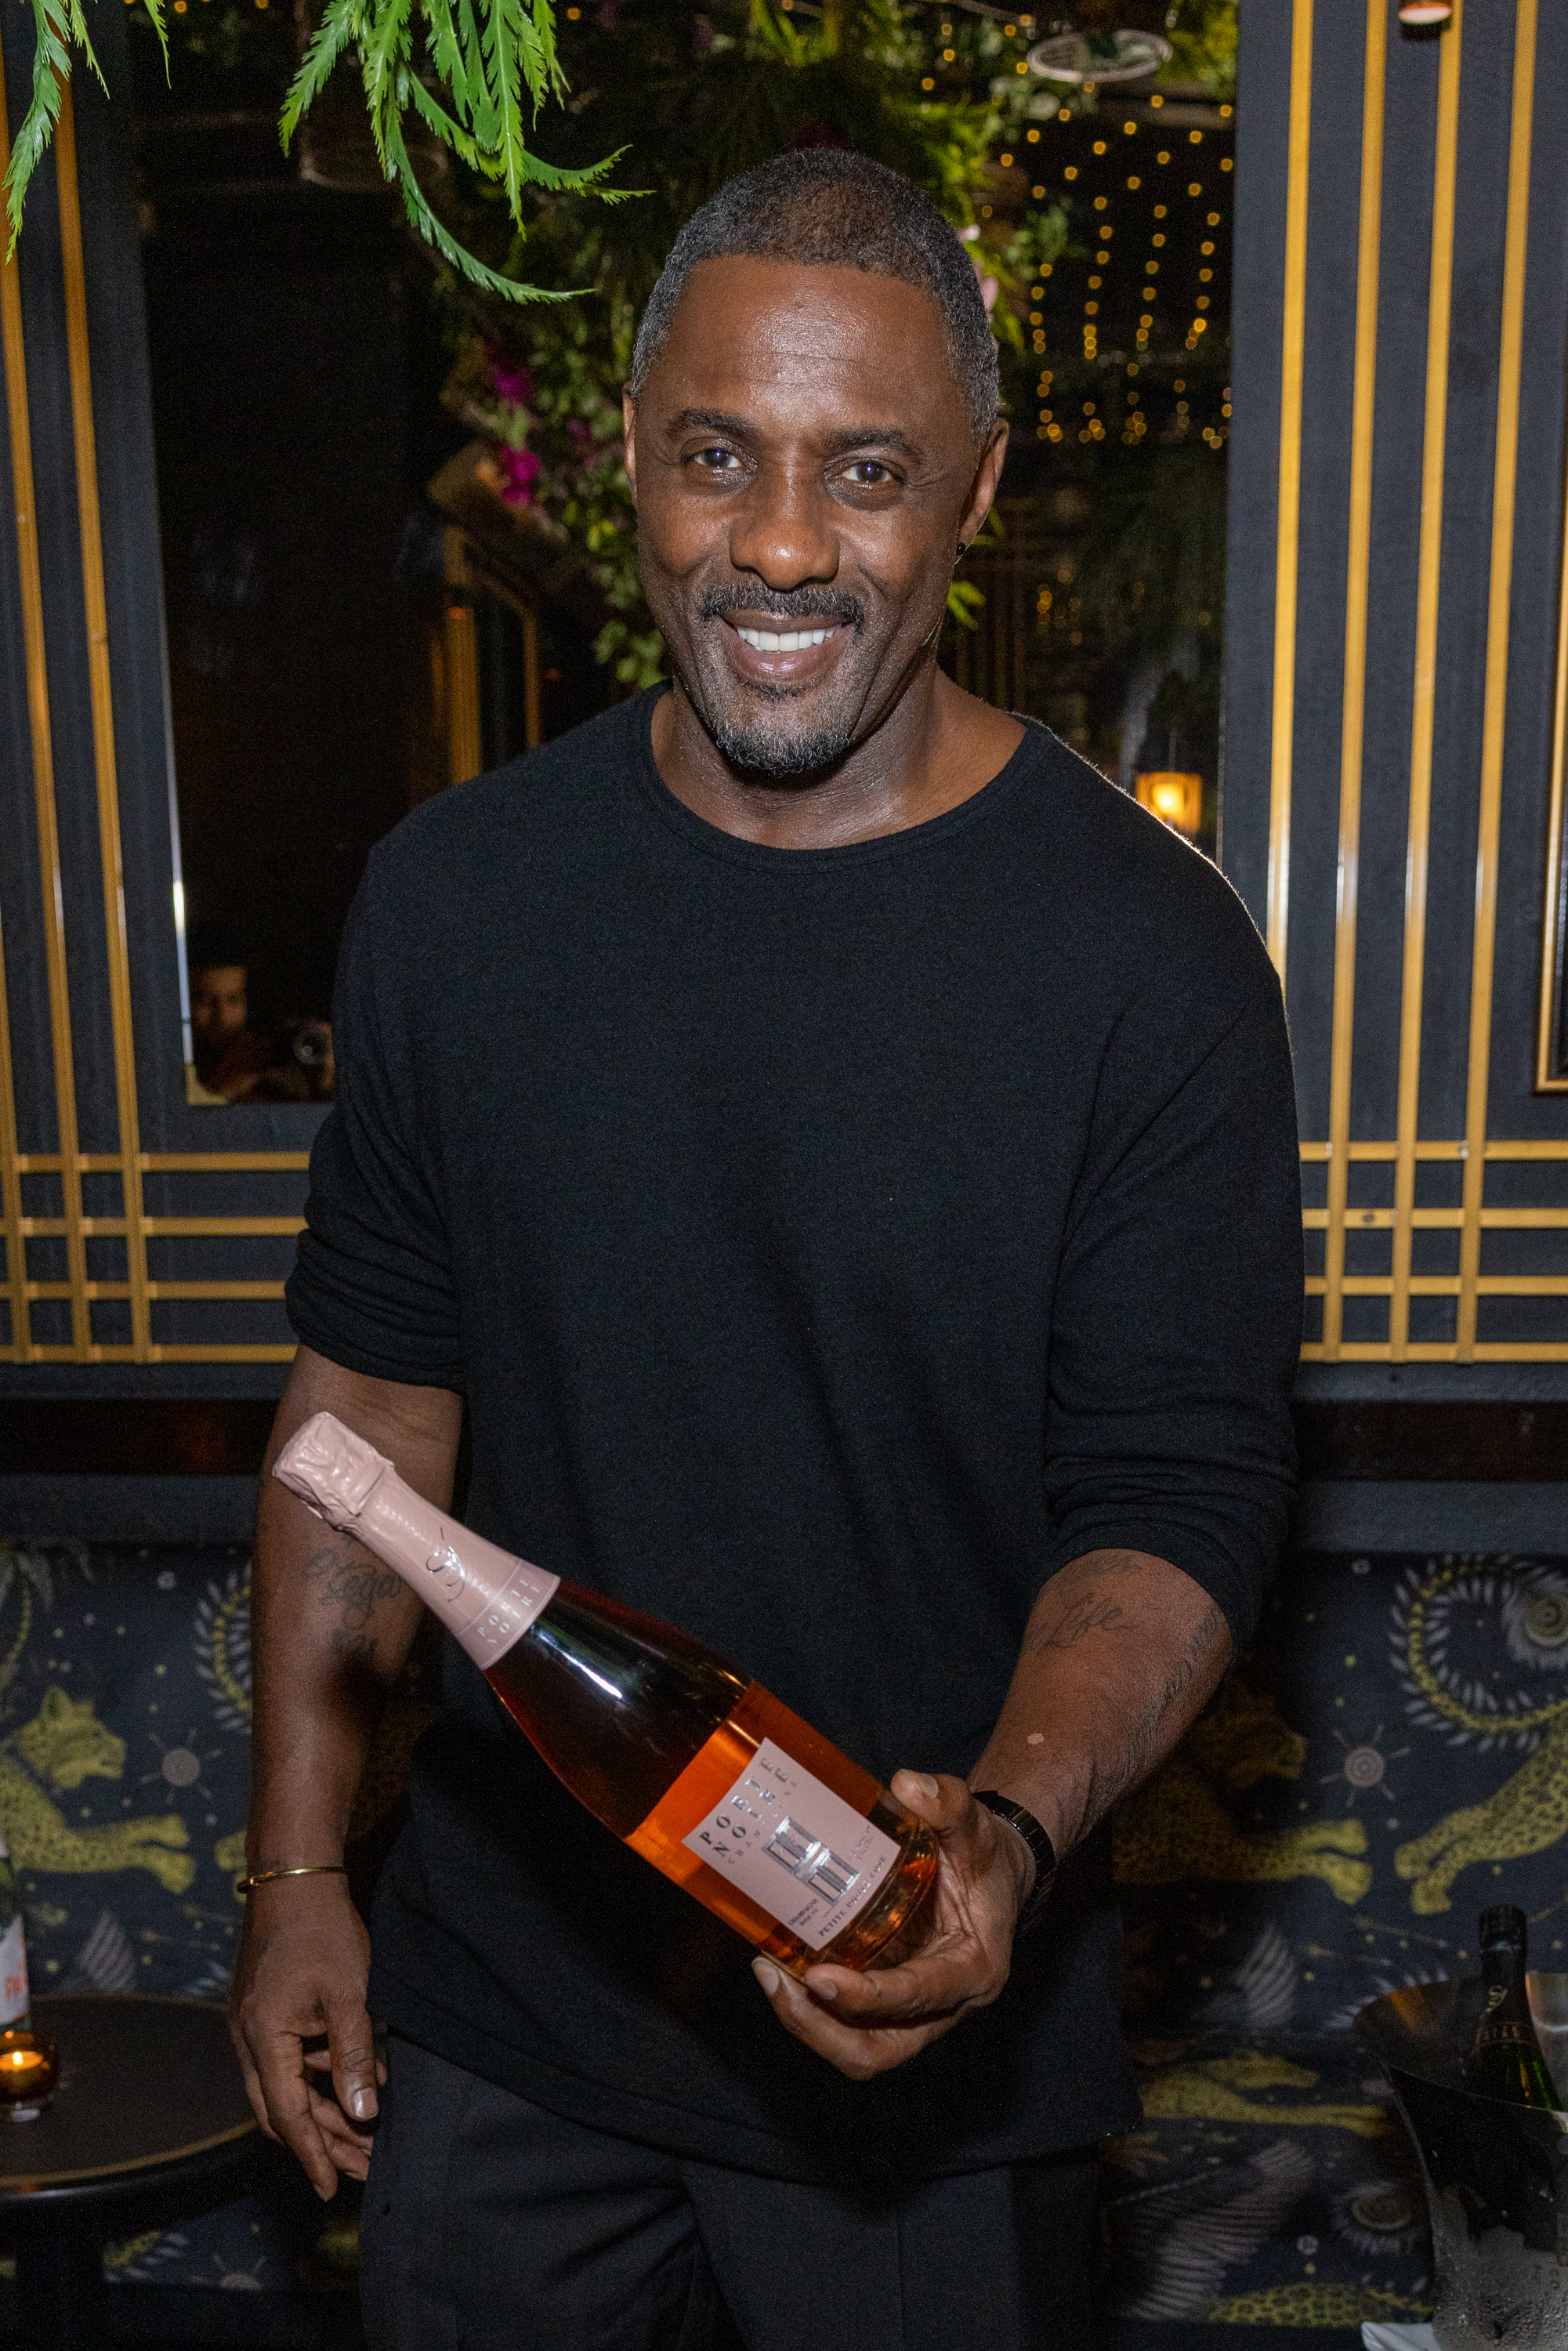 Close-up of Idris smiling in a T-shirt and holding a bottle of wine